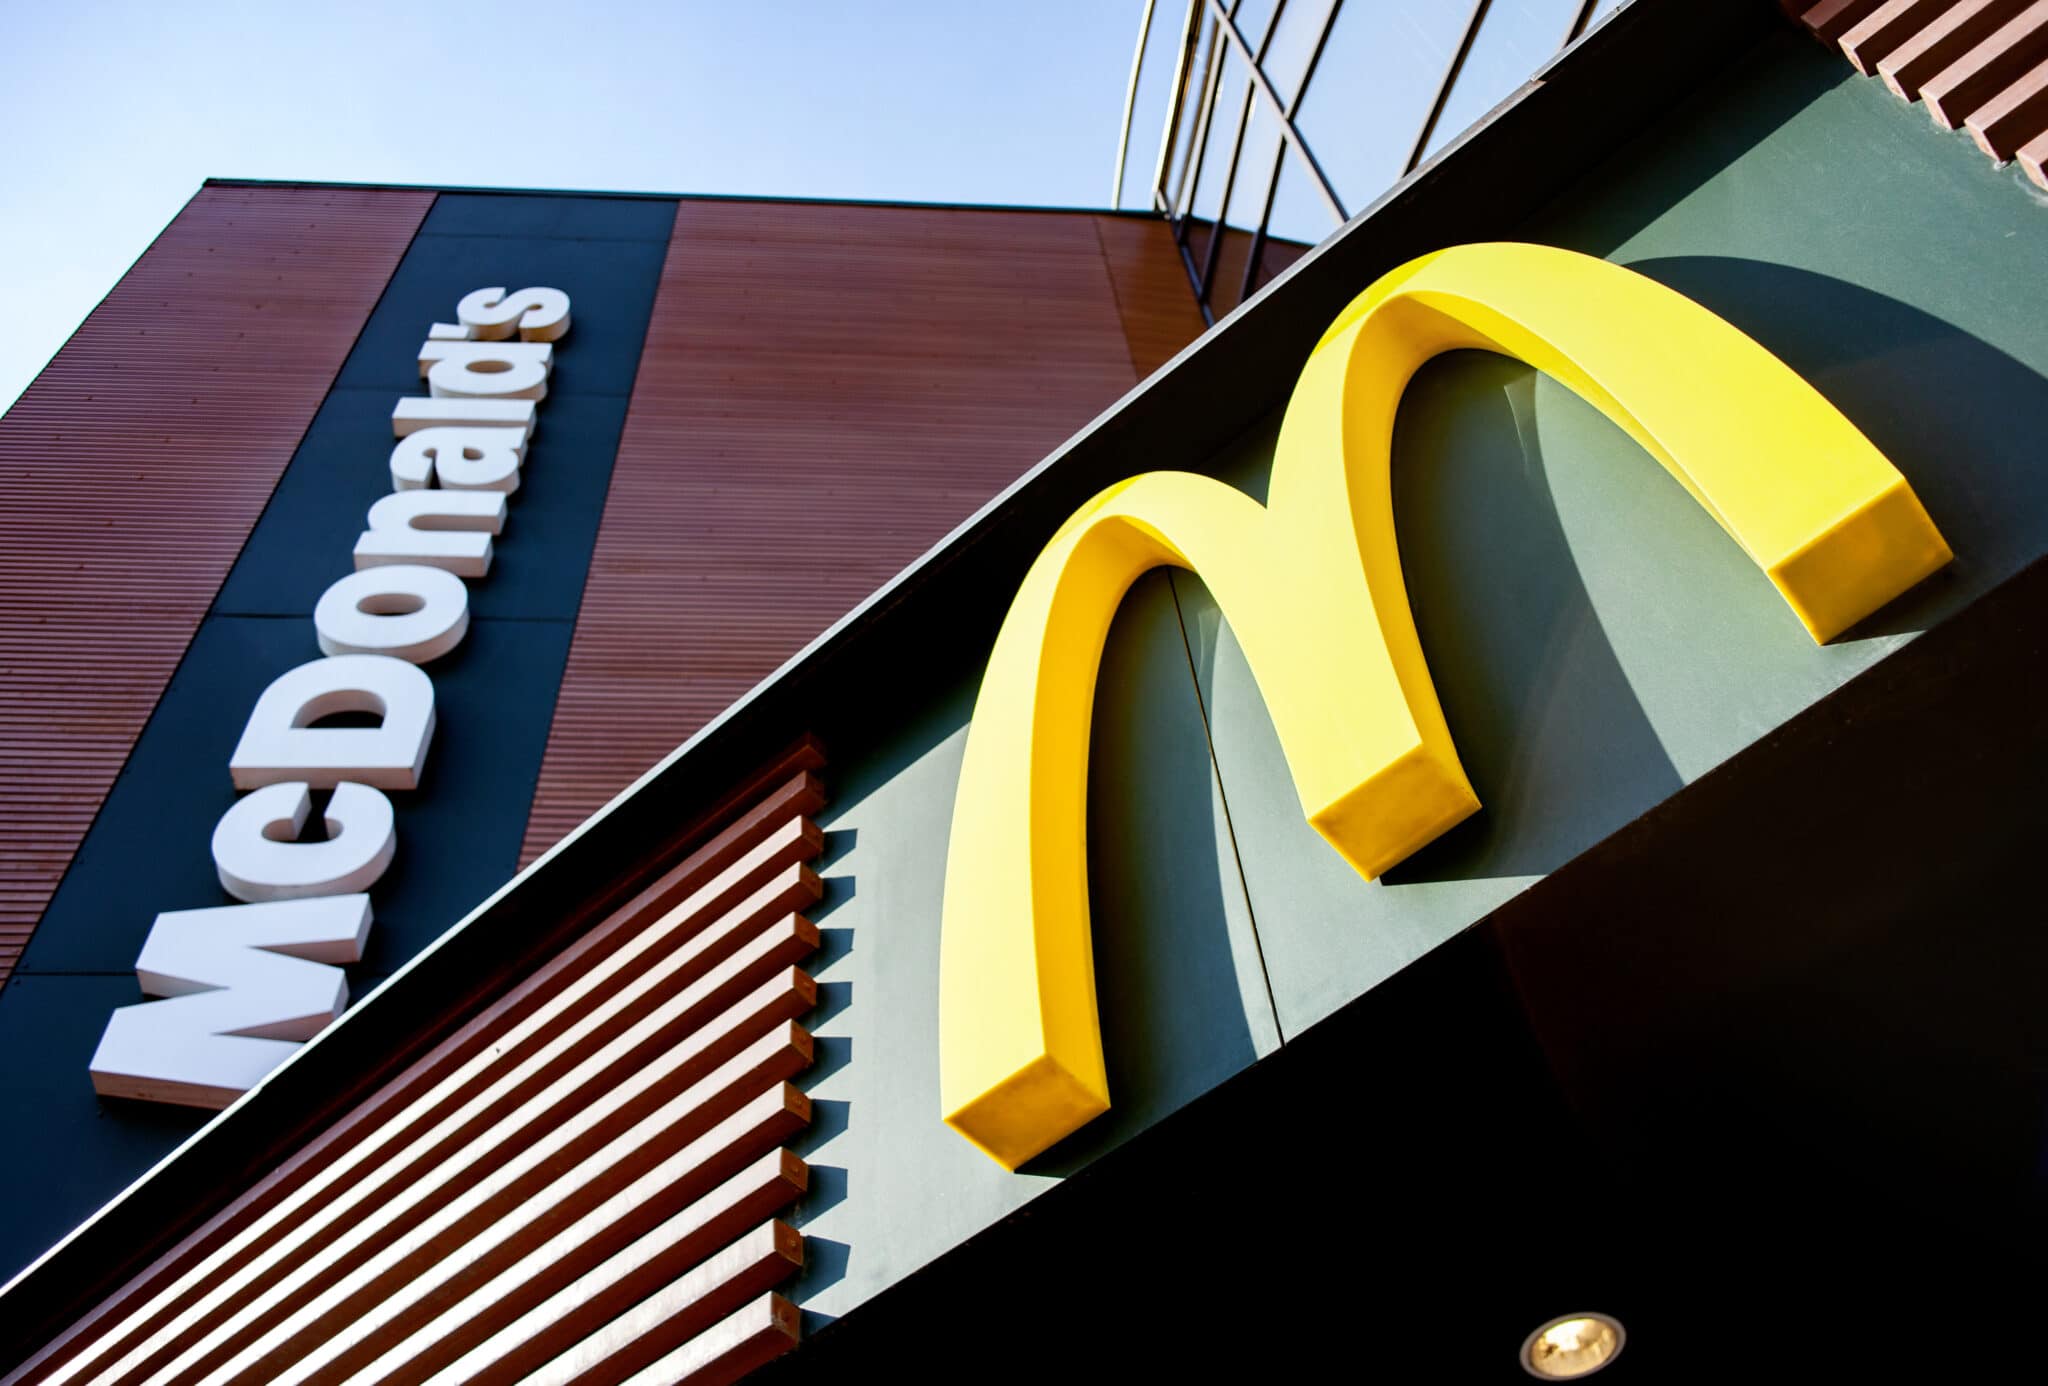 Two arrested in assault at McDonald's that started over Splenda